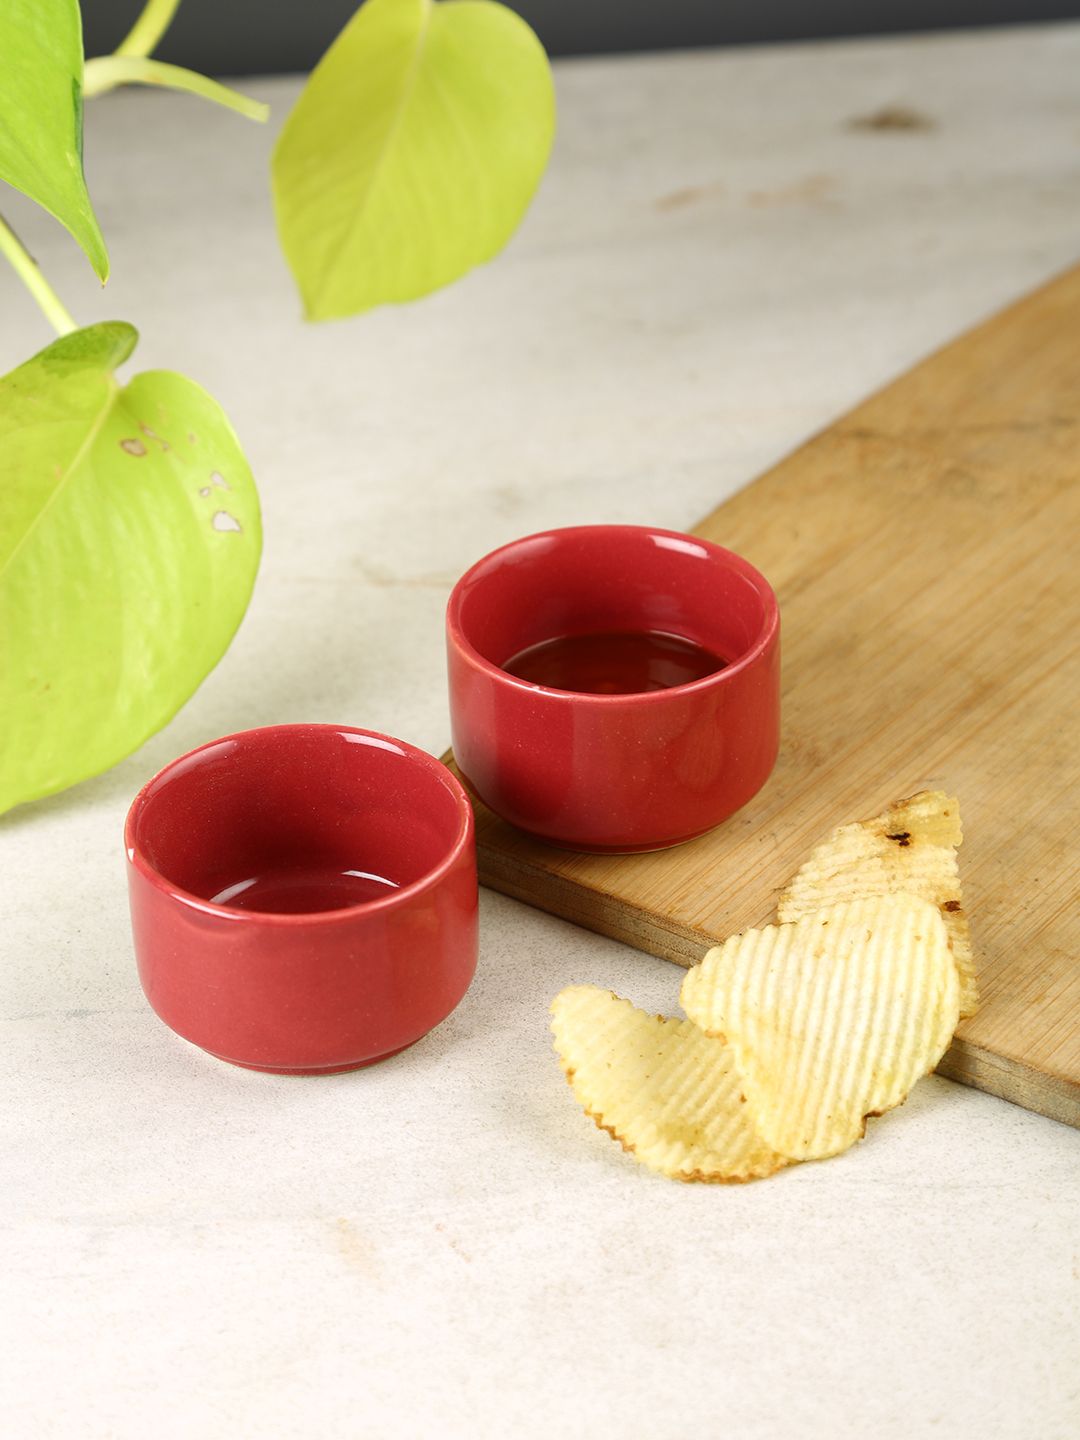 Aapno Rajasthan Red & 4 Pieces Ceramic Glossy Bowls Price in India